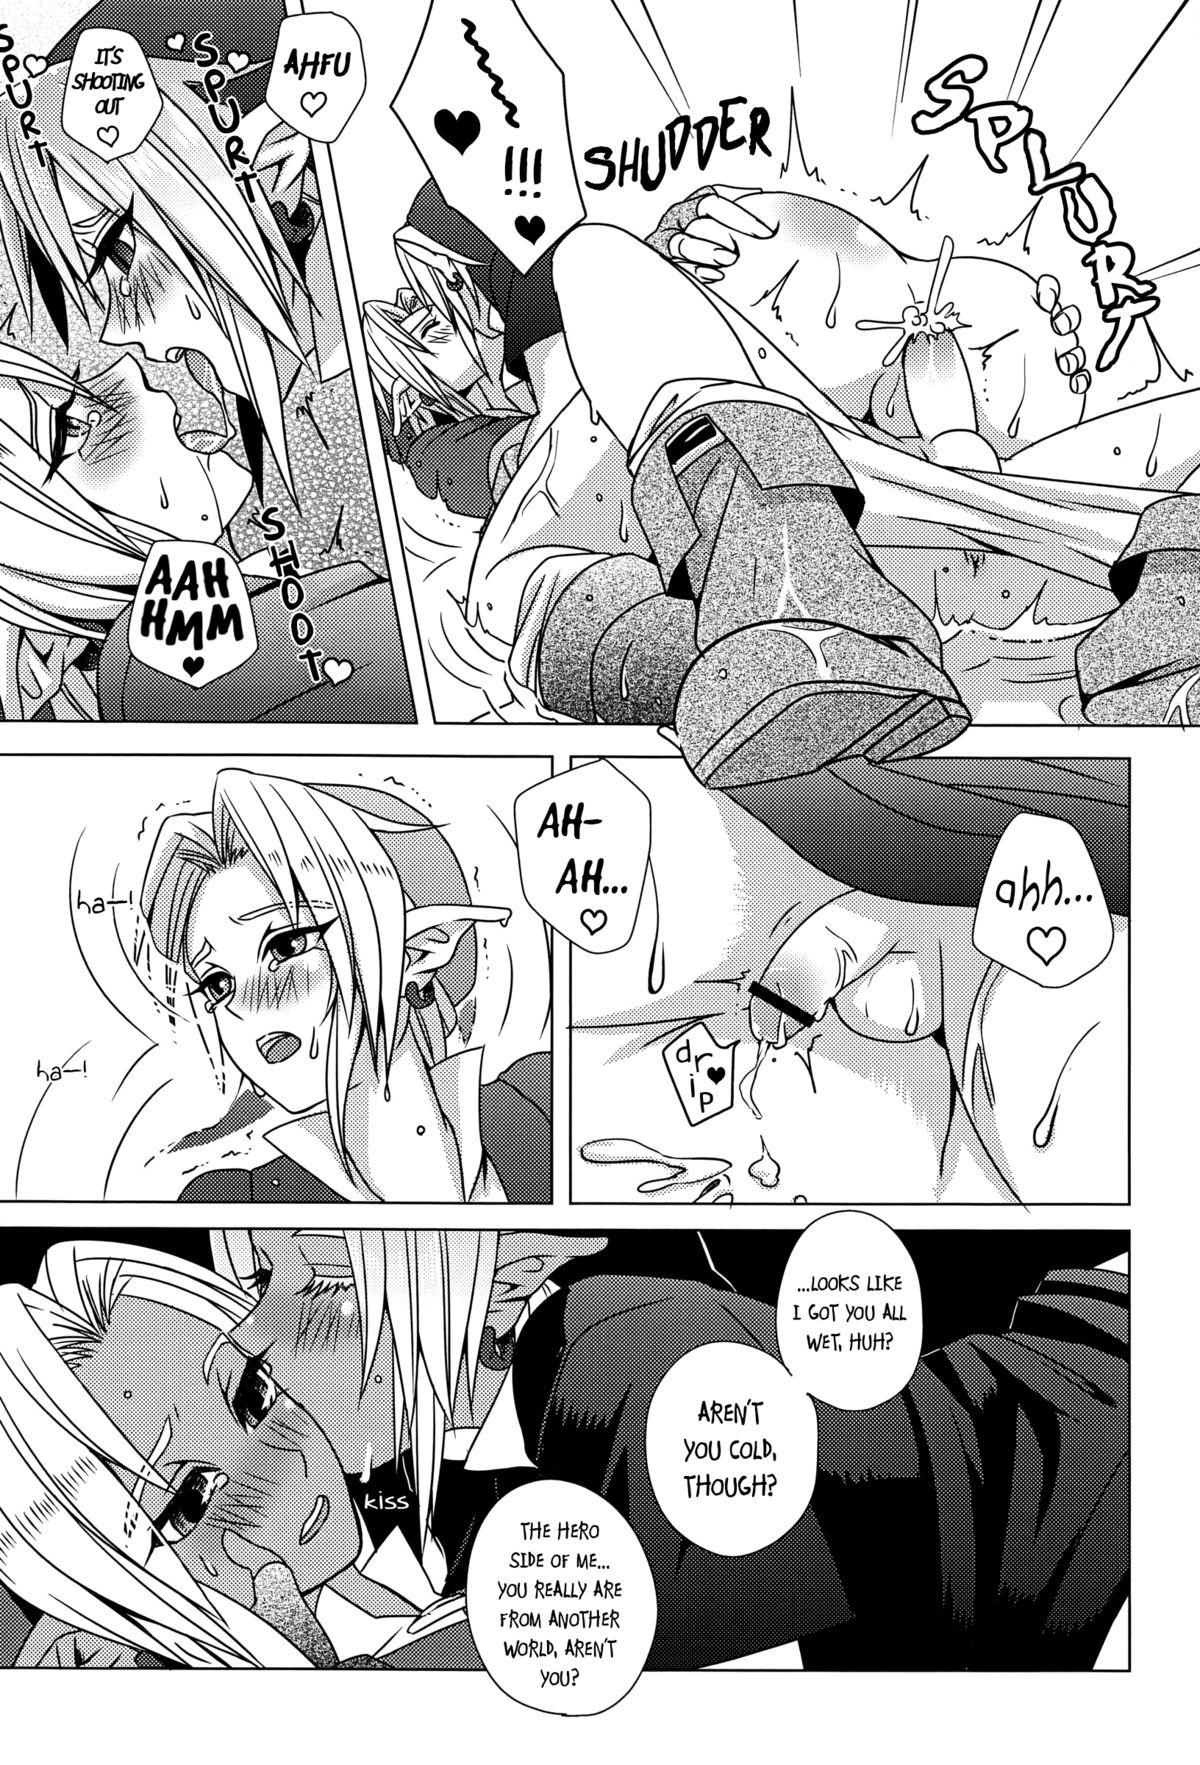 Breasts From The Underground - The legend of zelda Gay Handjob - Page 14